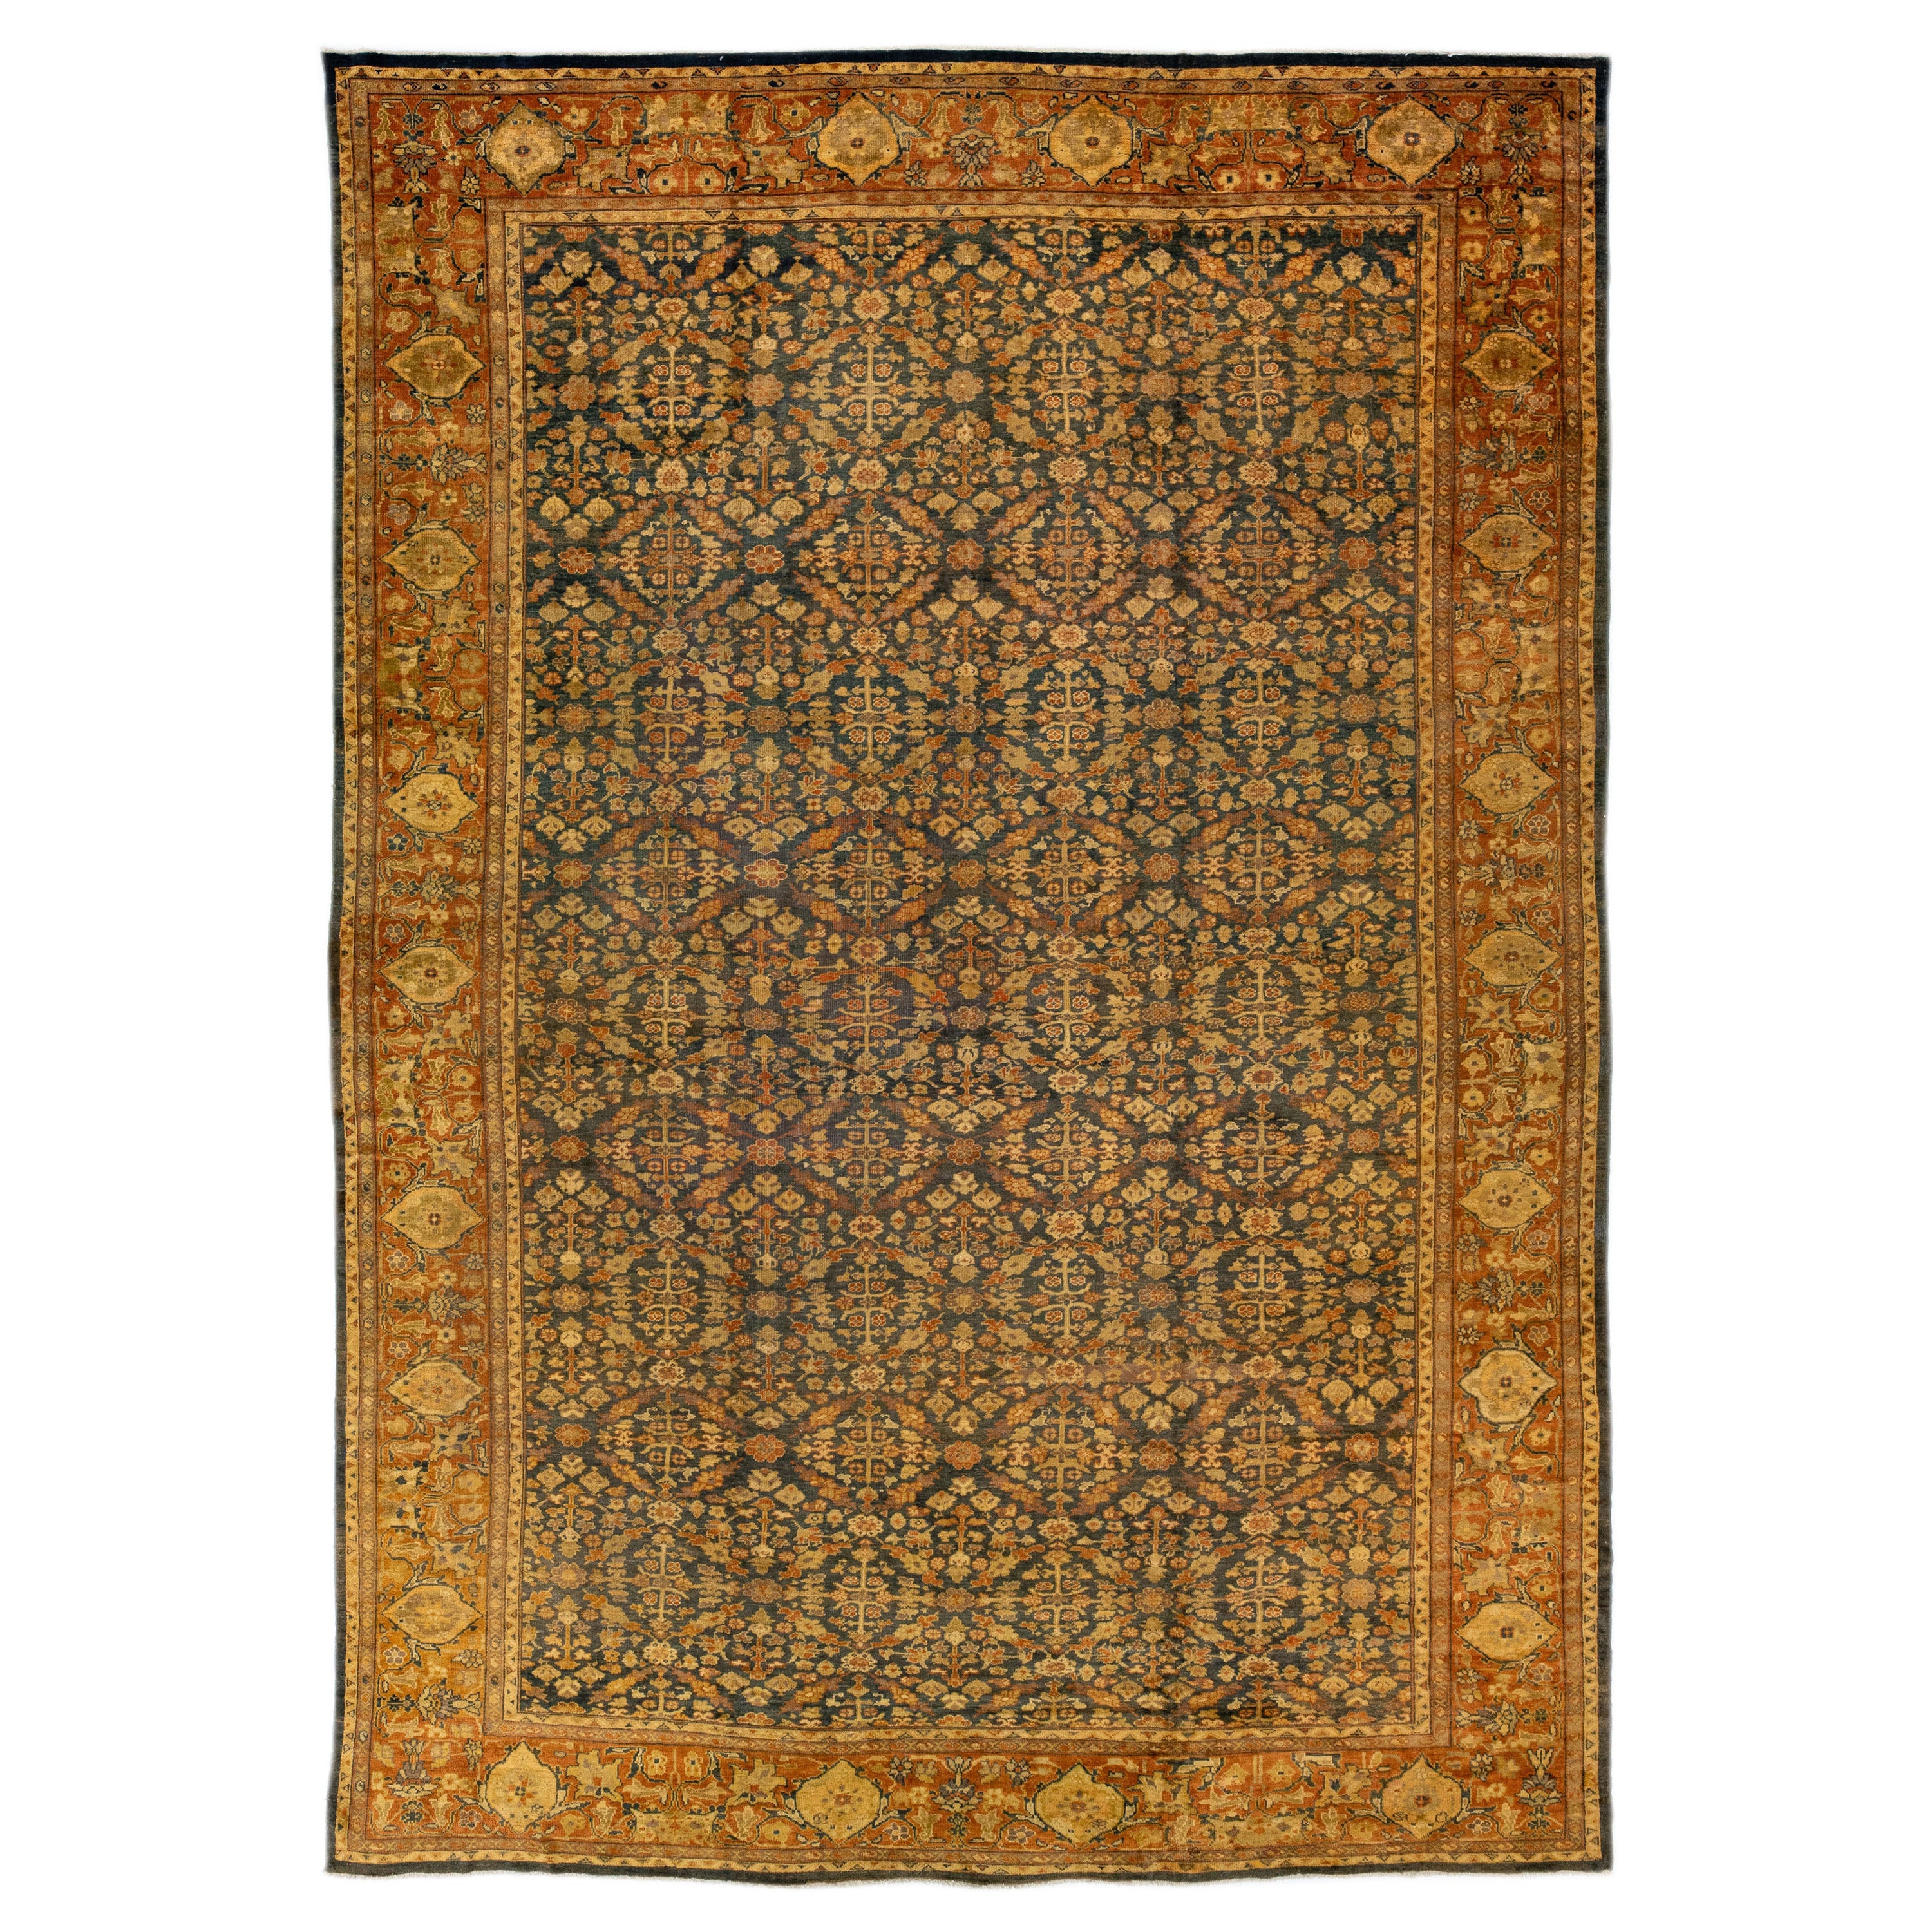 Antique Sultanabad Handmade Blue & Rust Wool Rug with Allover Floral Pattern